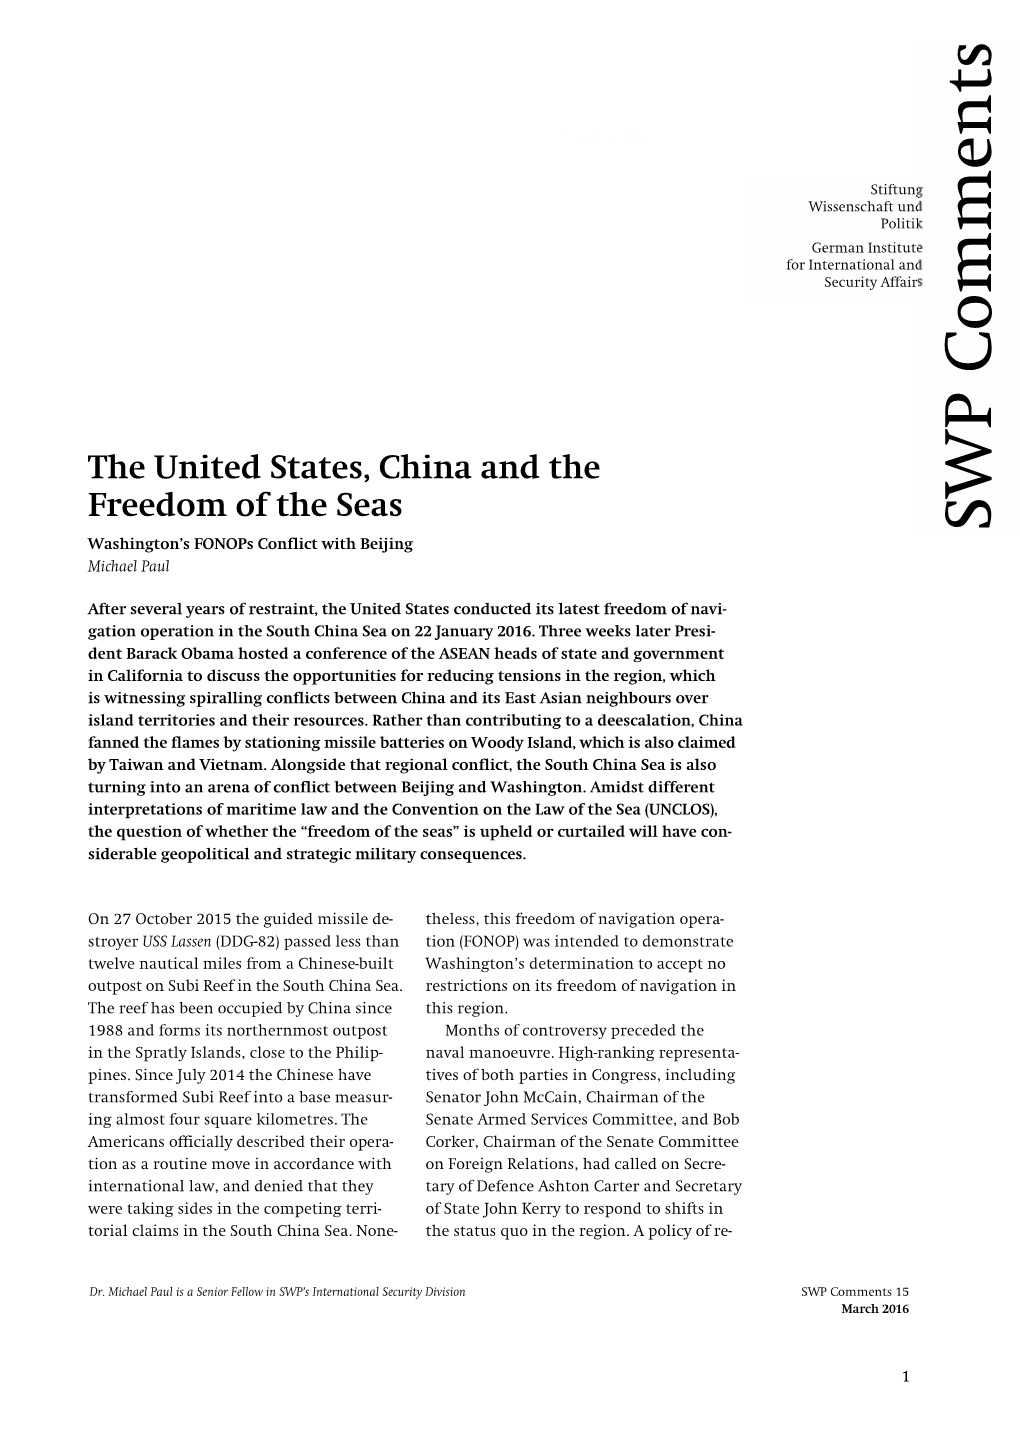 The United States, China and the Freedom of the Seas. Washington's